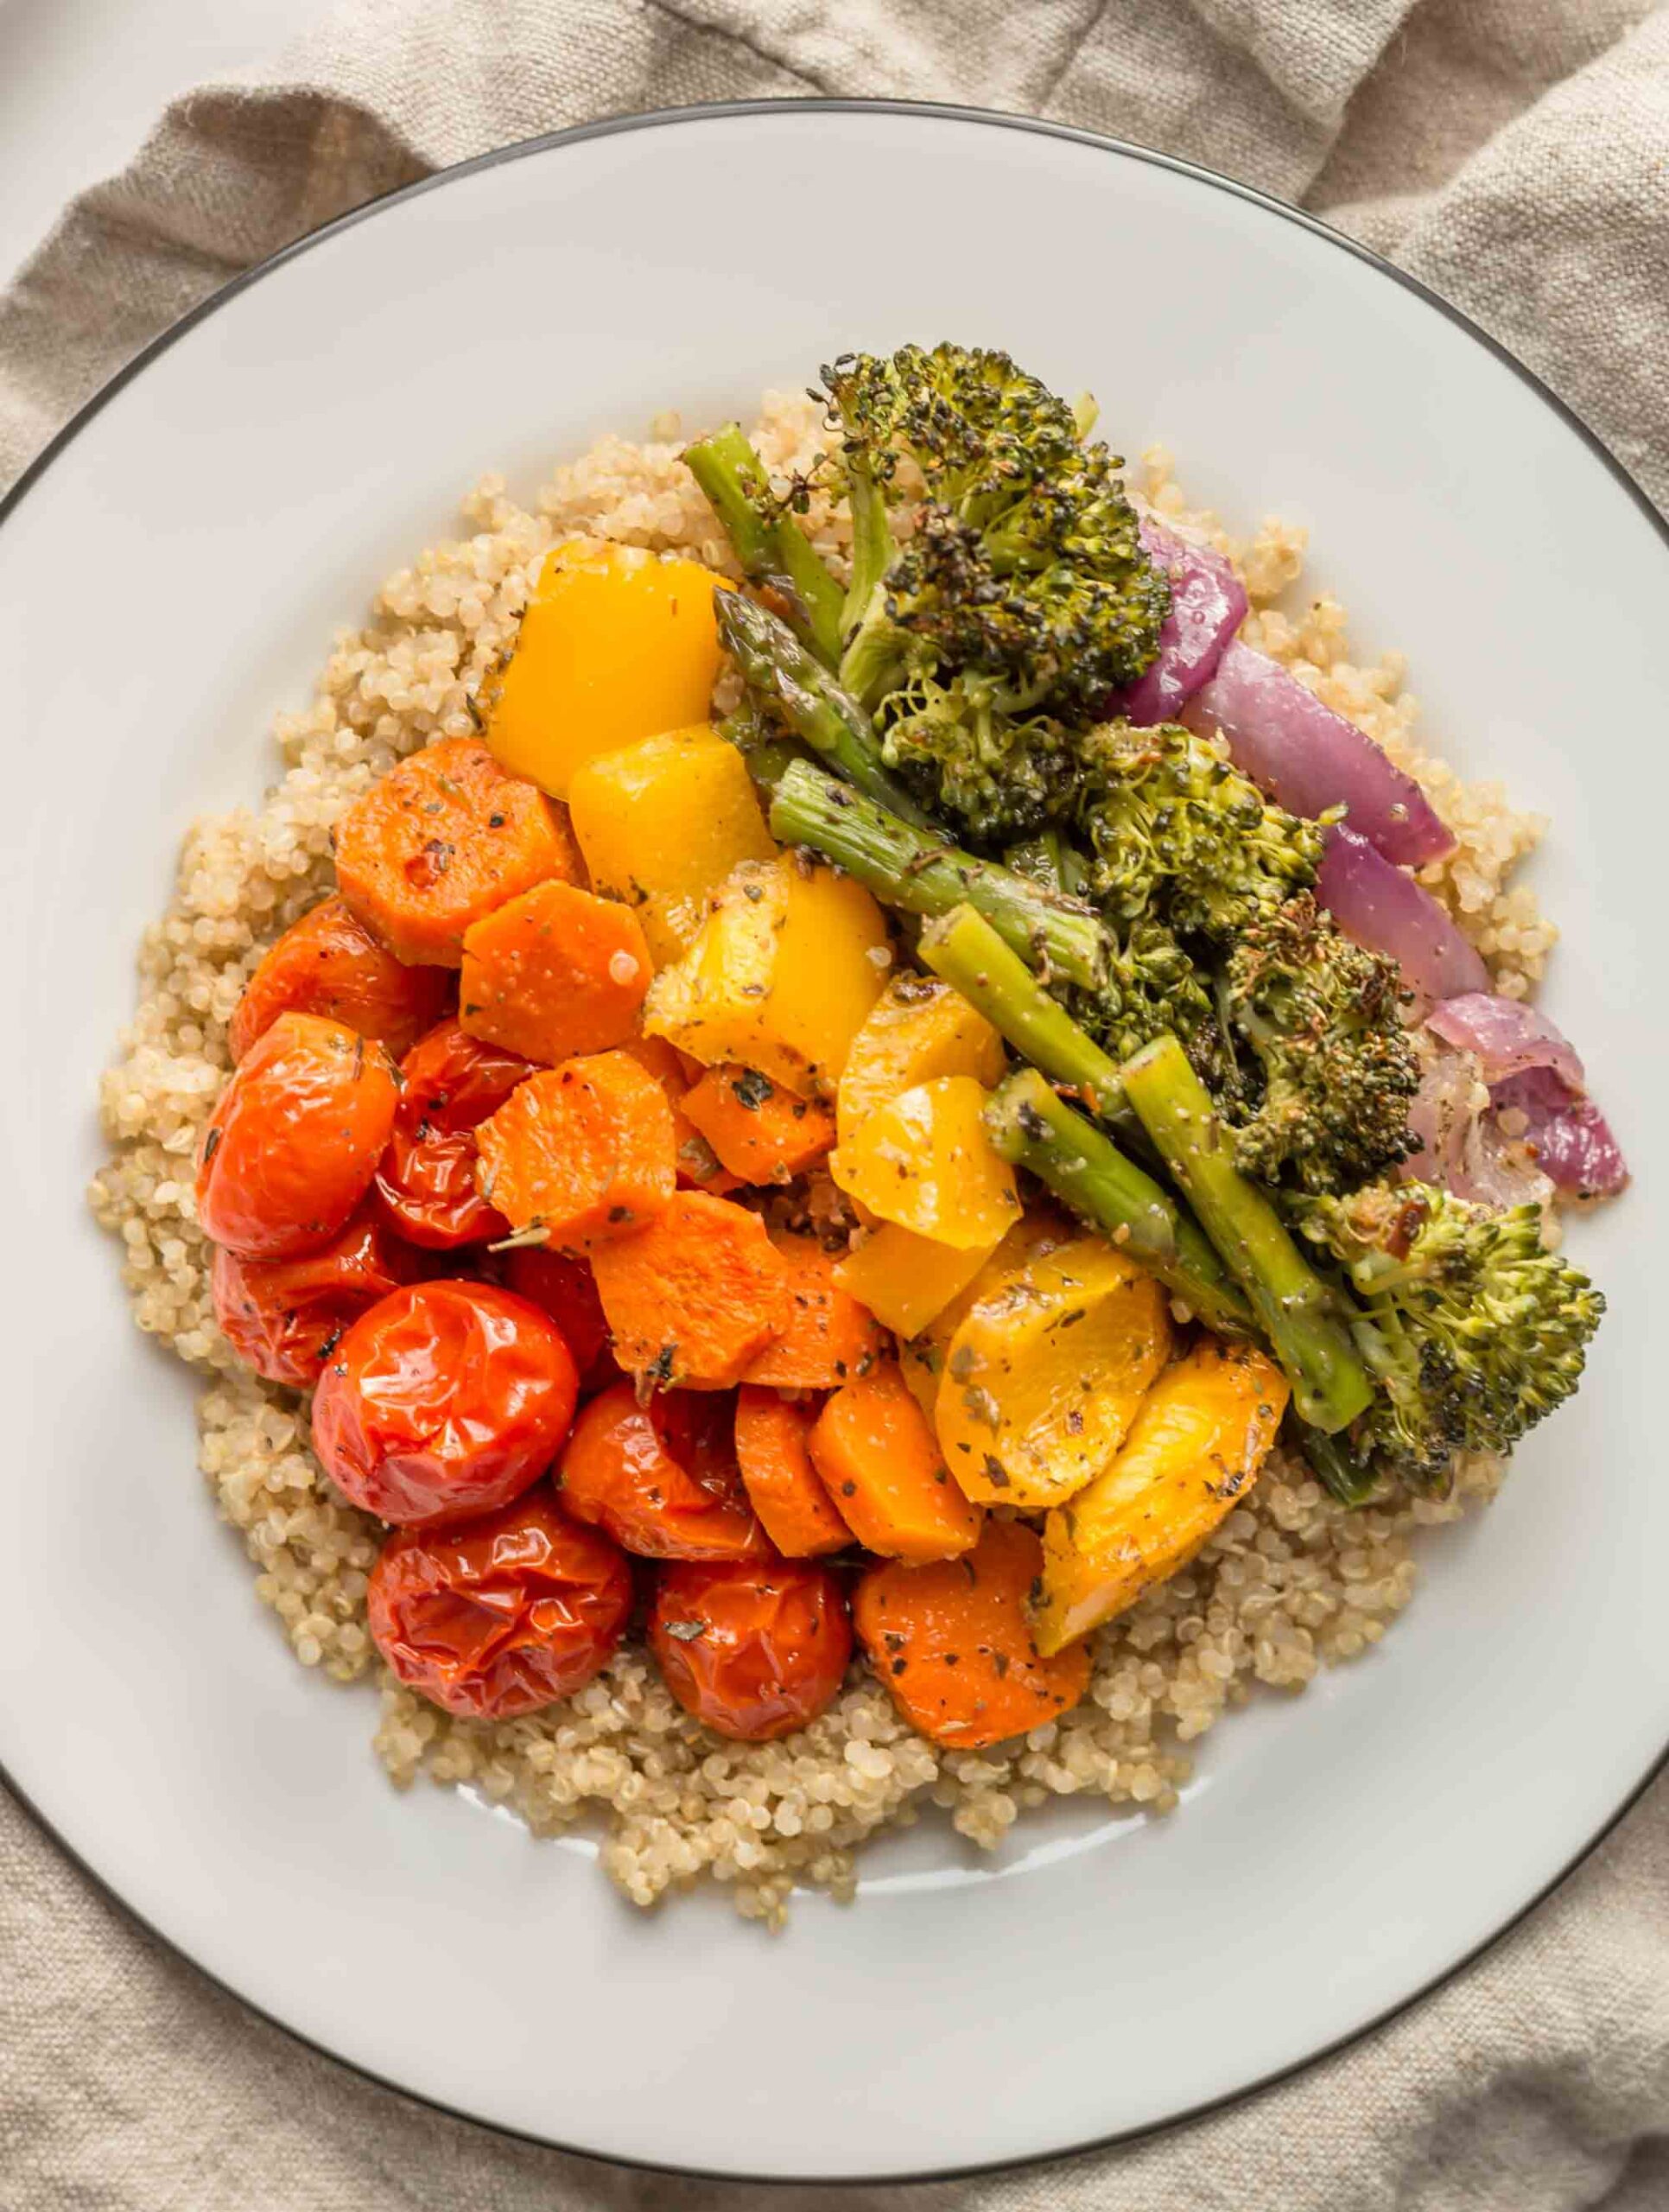 Dinner plate with healthy whole foods roasted rainbow veggies over quinoa. 